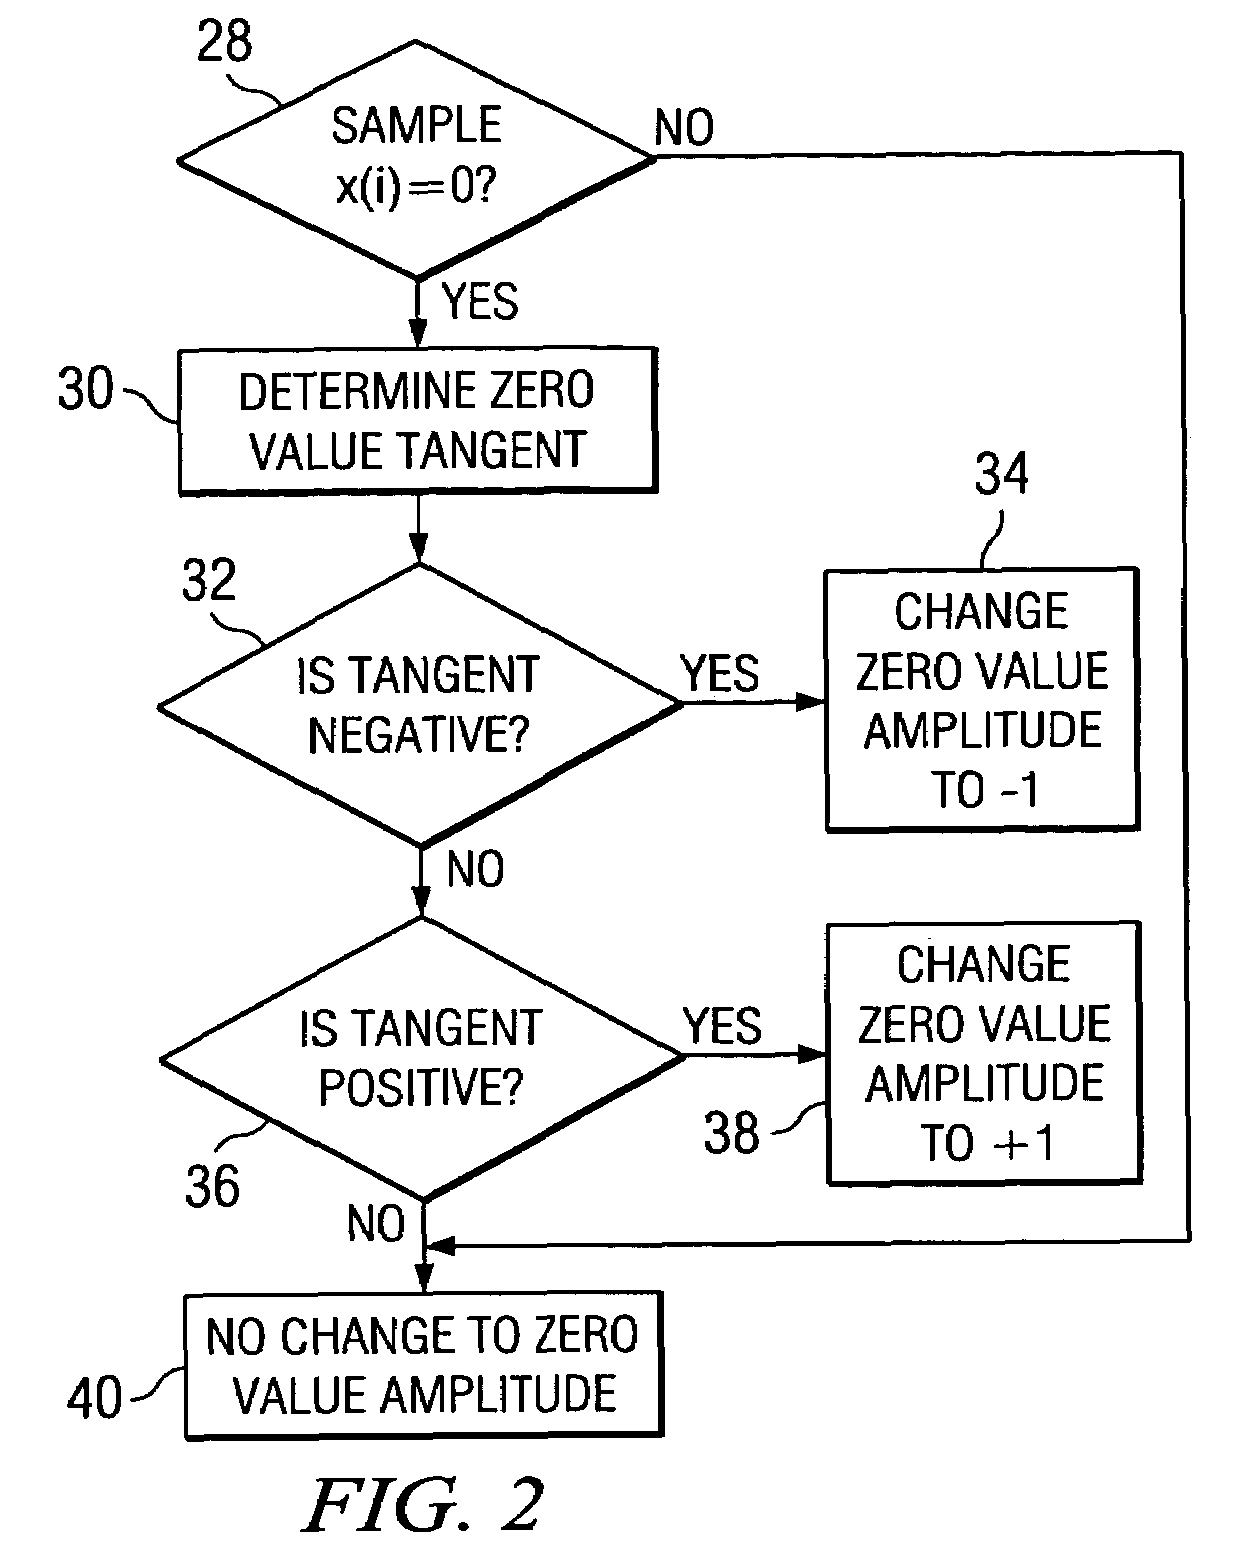 Tone, modulated tone, and saturated tone detection in a voice activity detection device